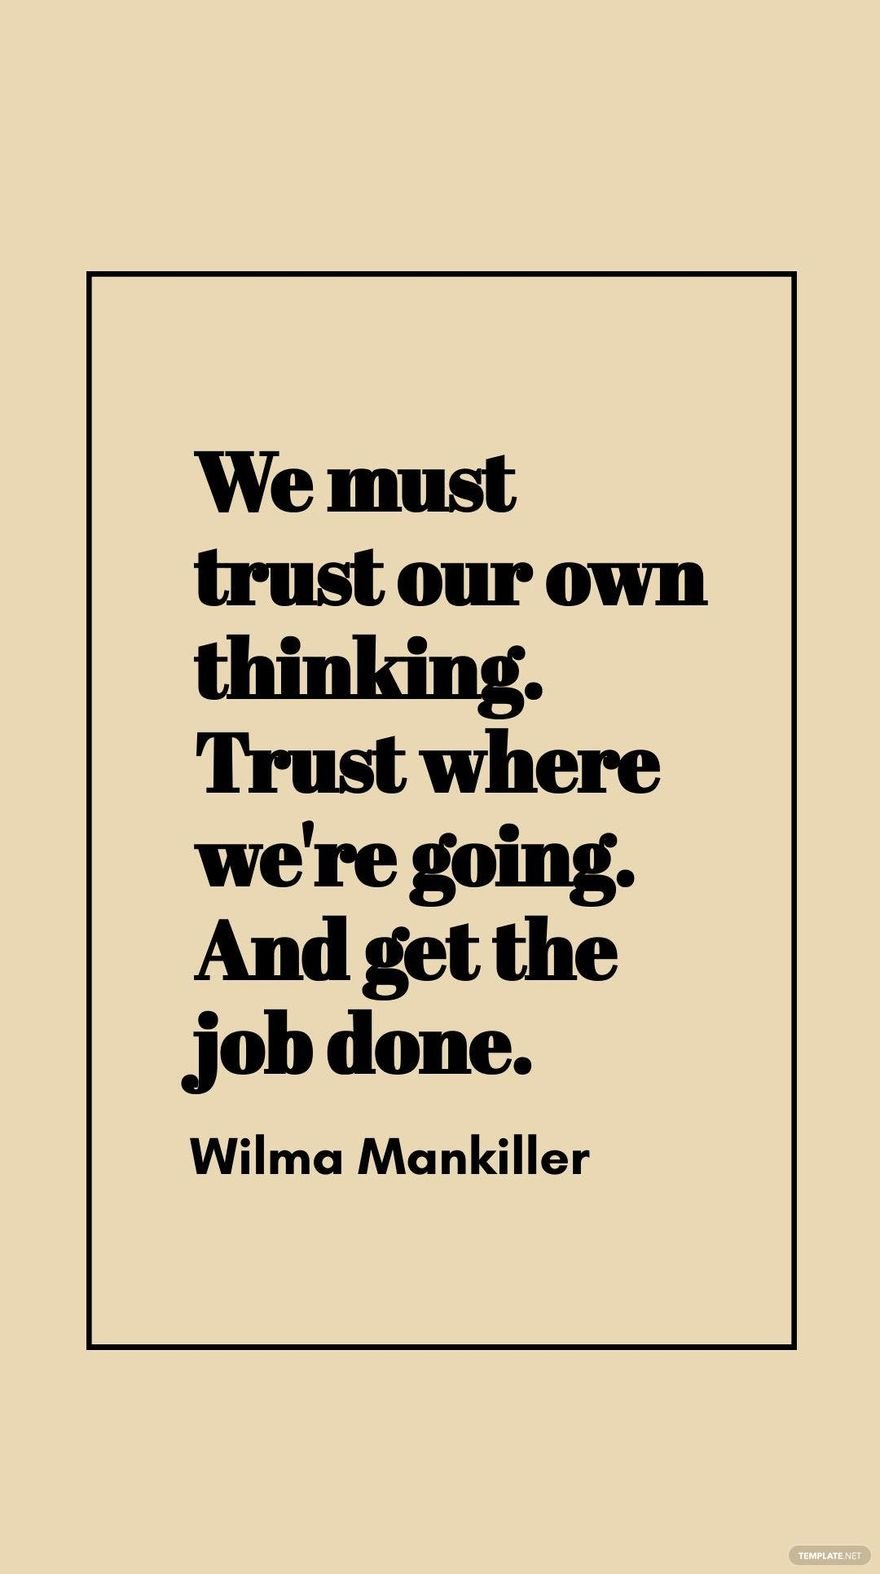 Free Wilma Mankiller - We must trust our own thinking. Trust where we're going. And get the job done. in JPG